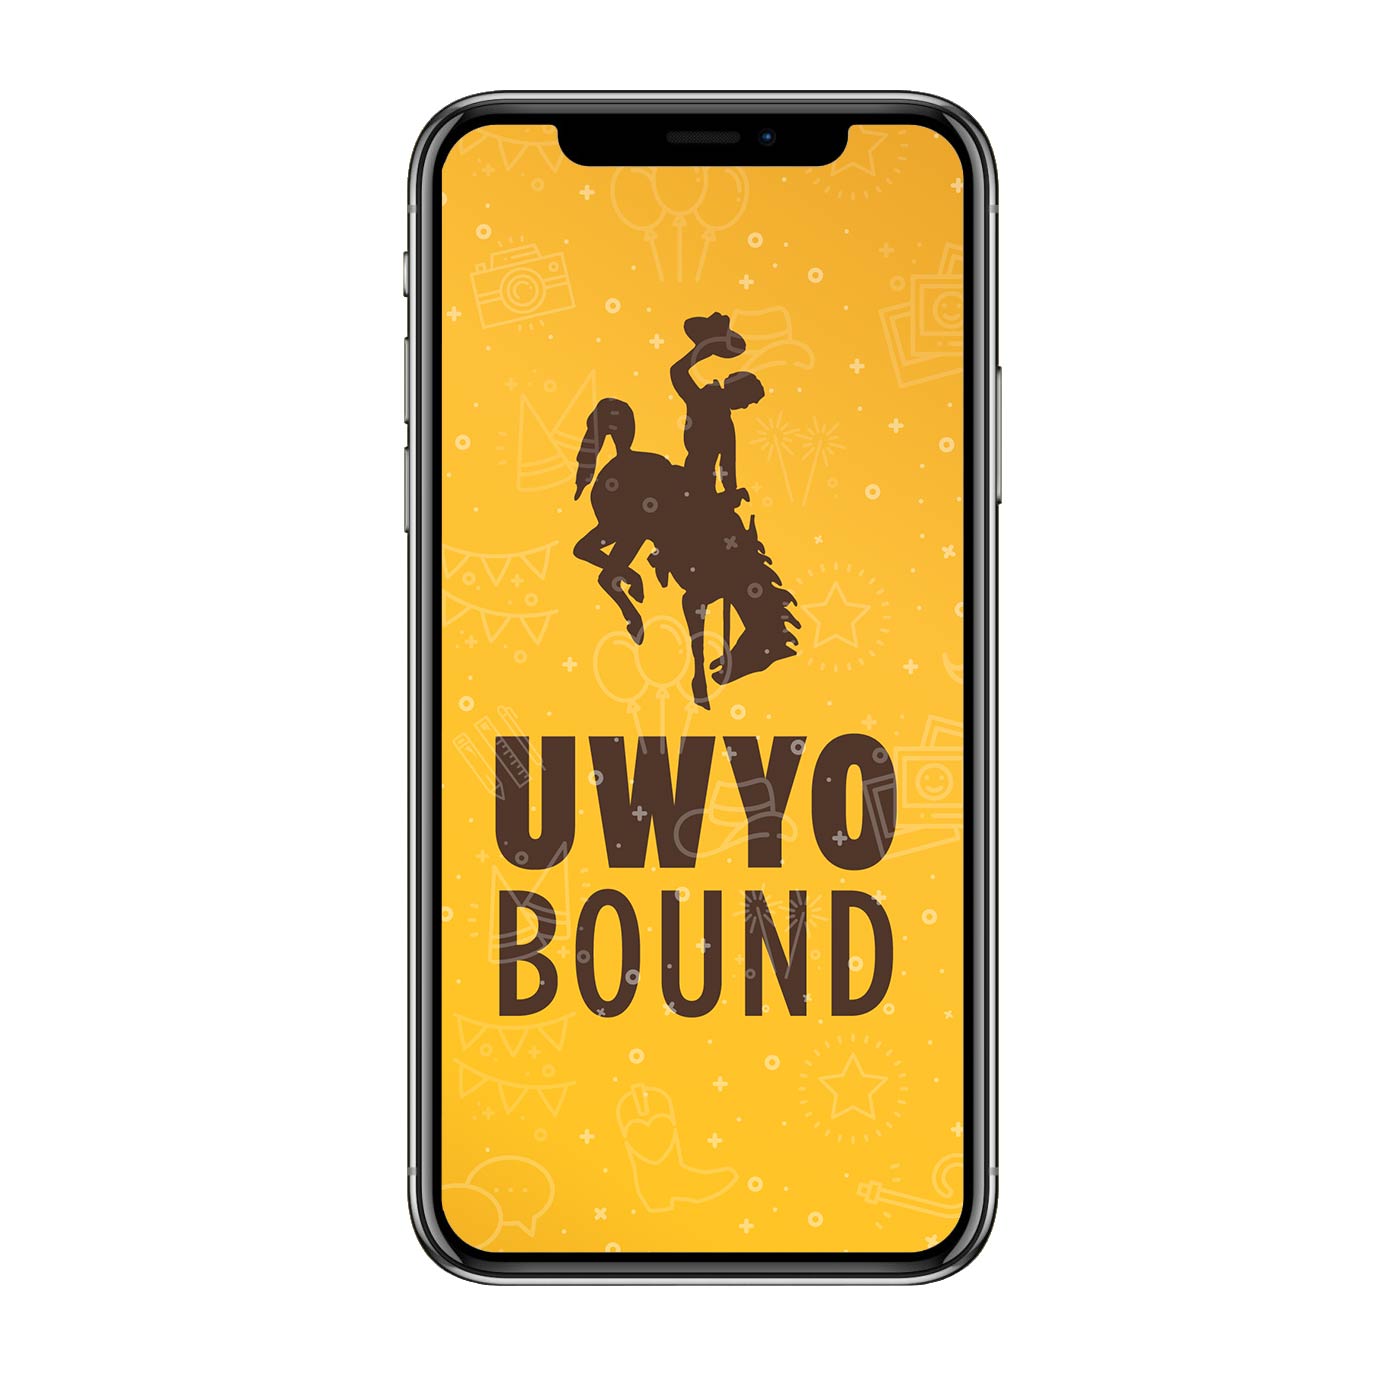 An iPhone screen with the words Uwyo Bound